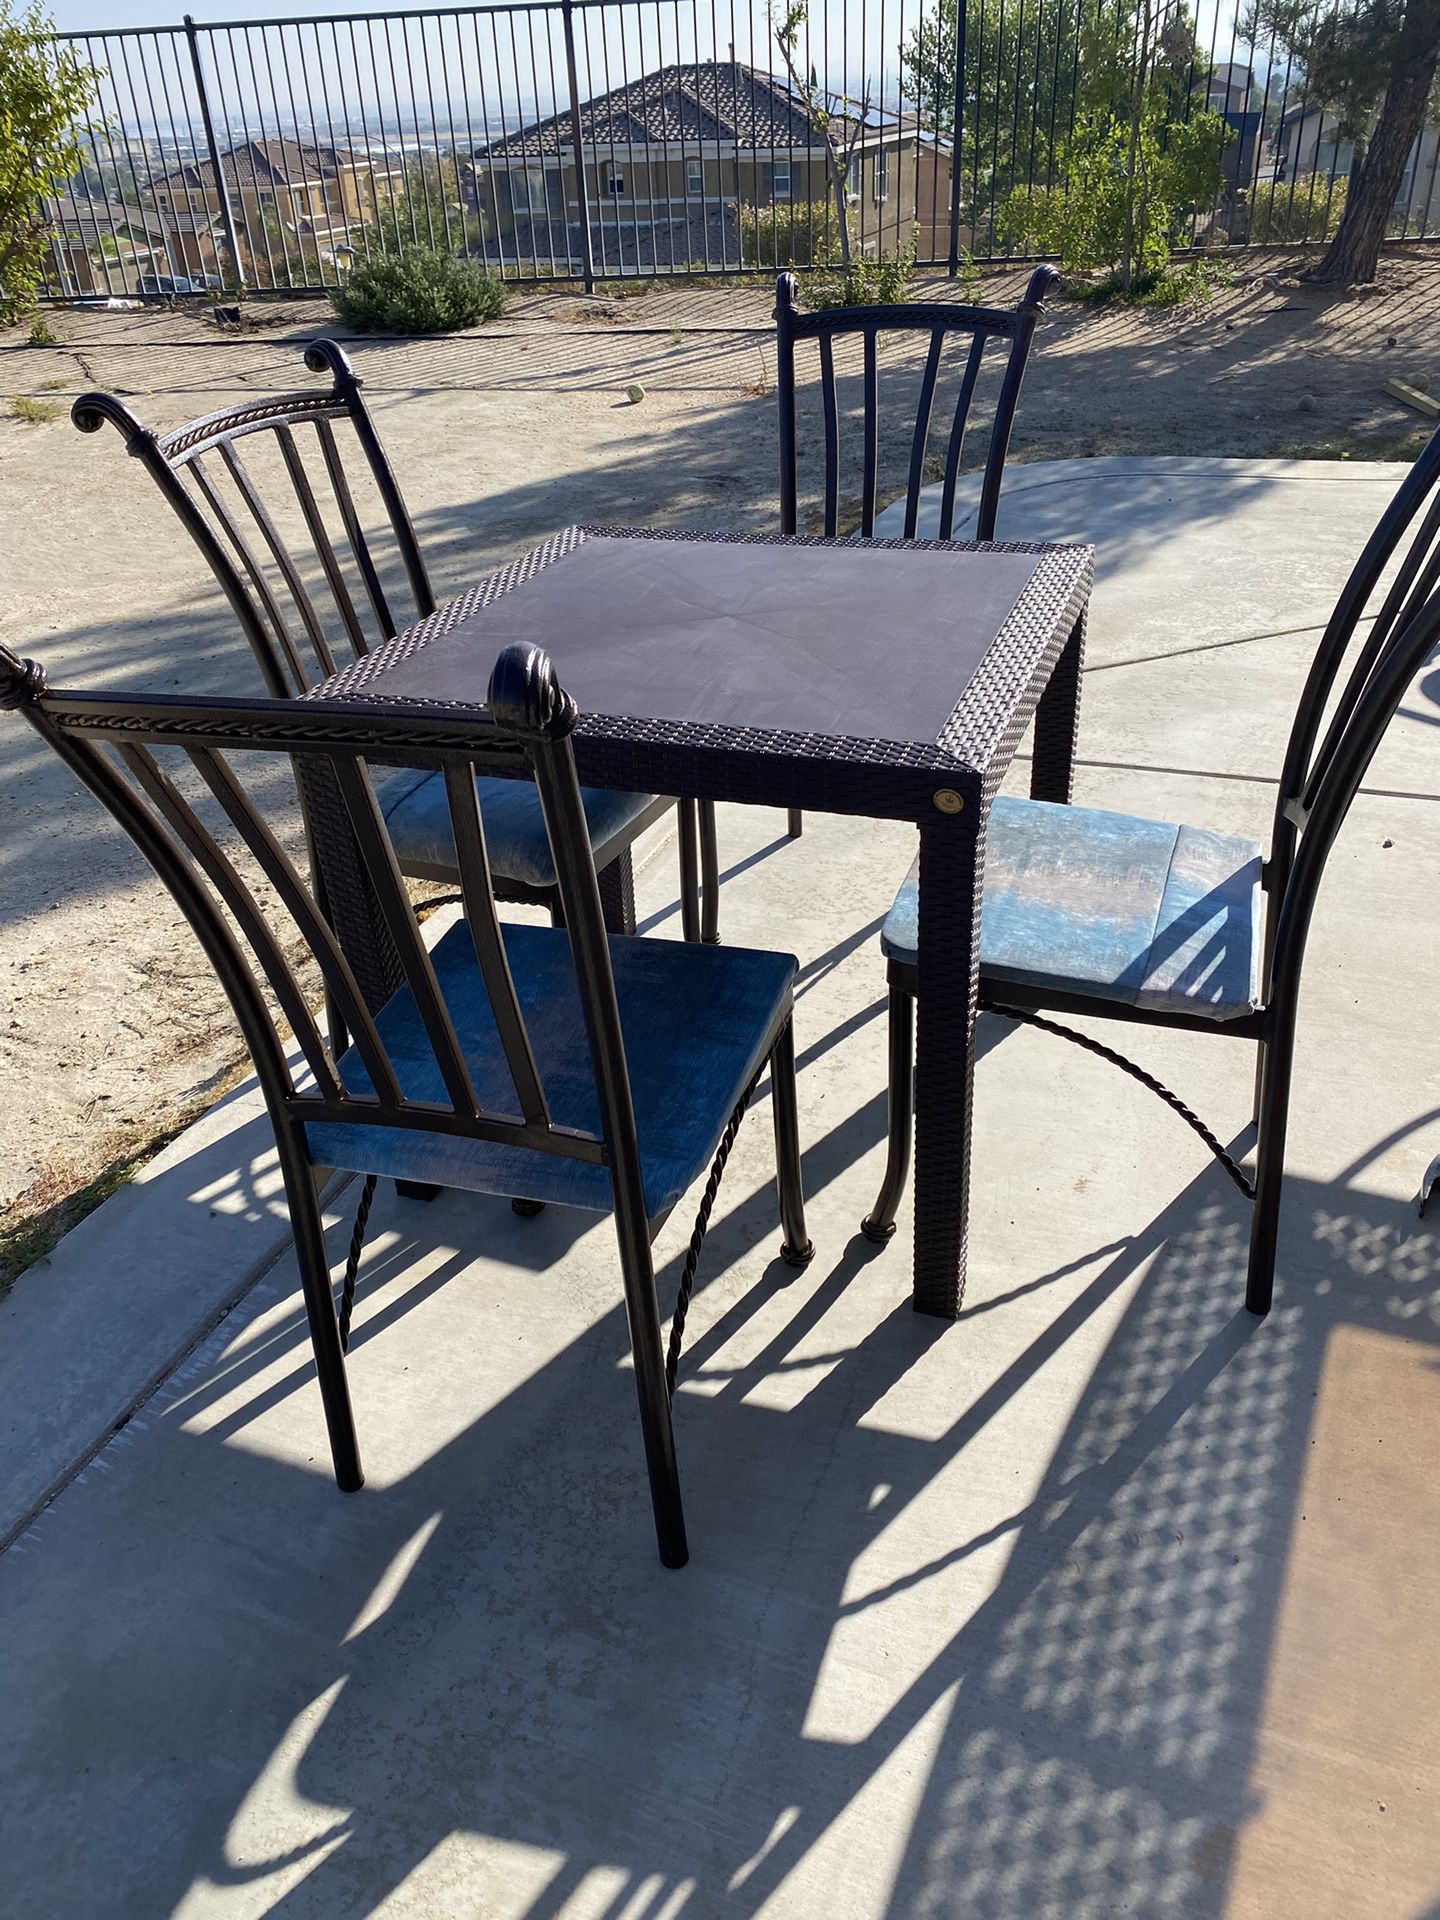 Outdoor Table With Chairs 